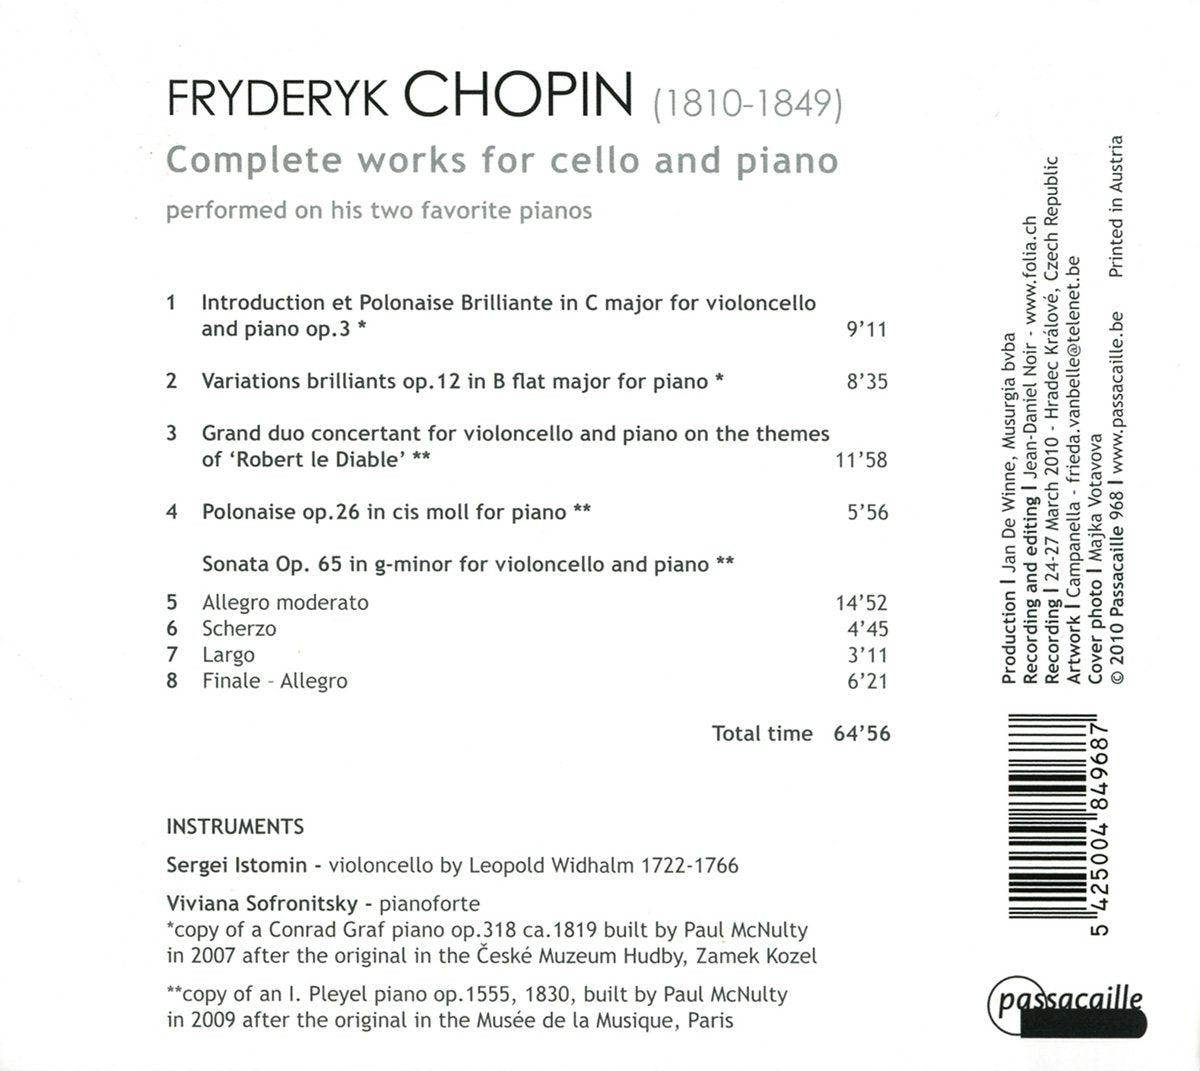 Chopin: Complete Works for Cello & Piano - Viviana Sofronitzky, Sergei Istomin